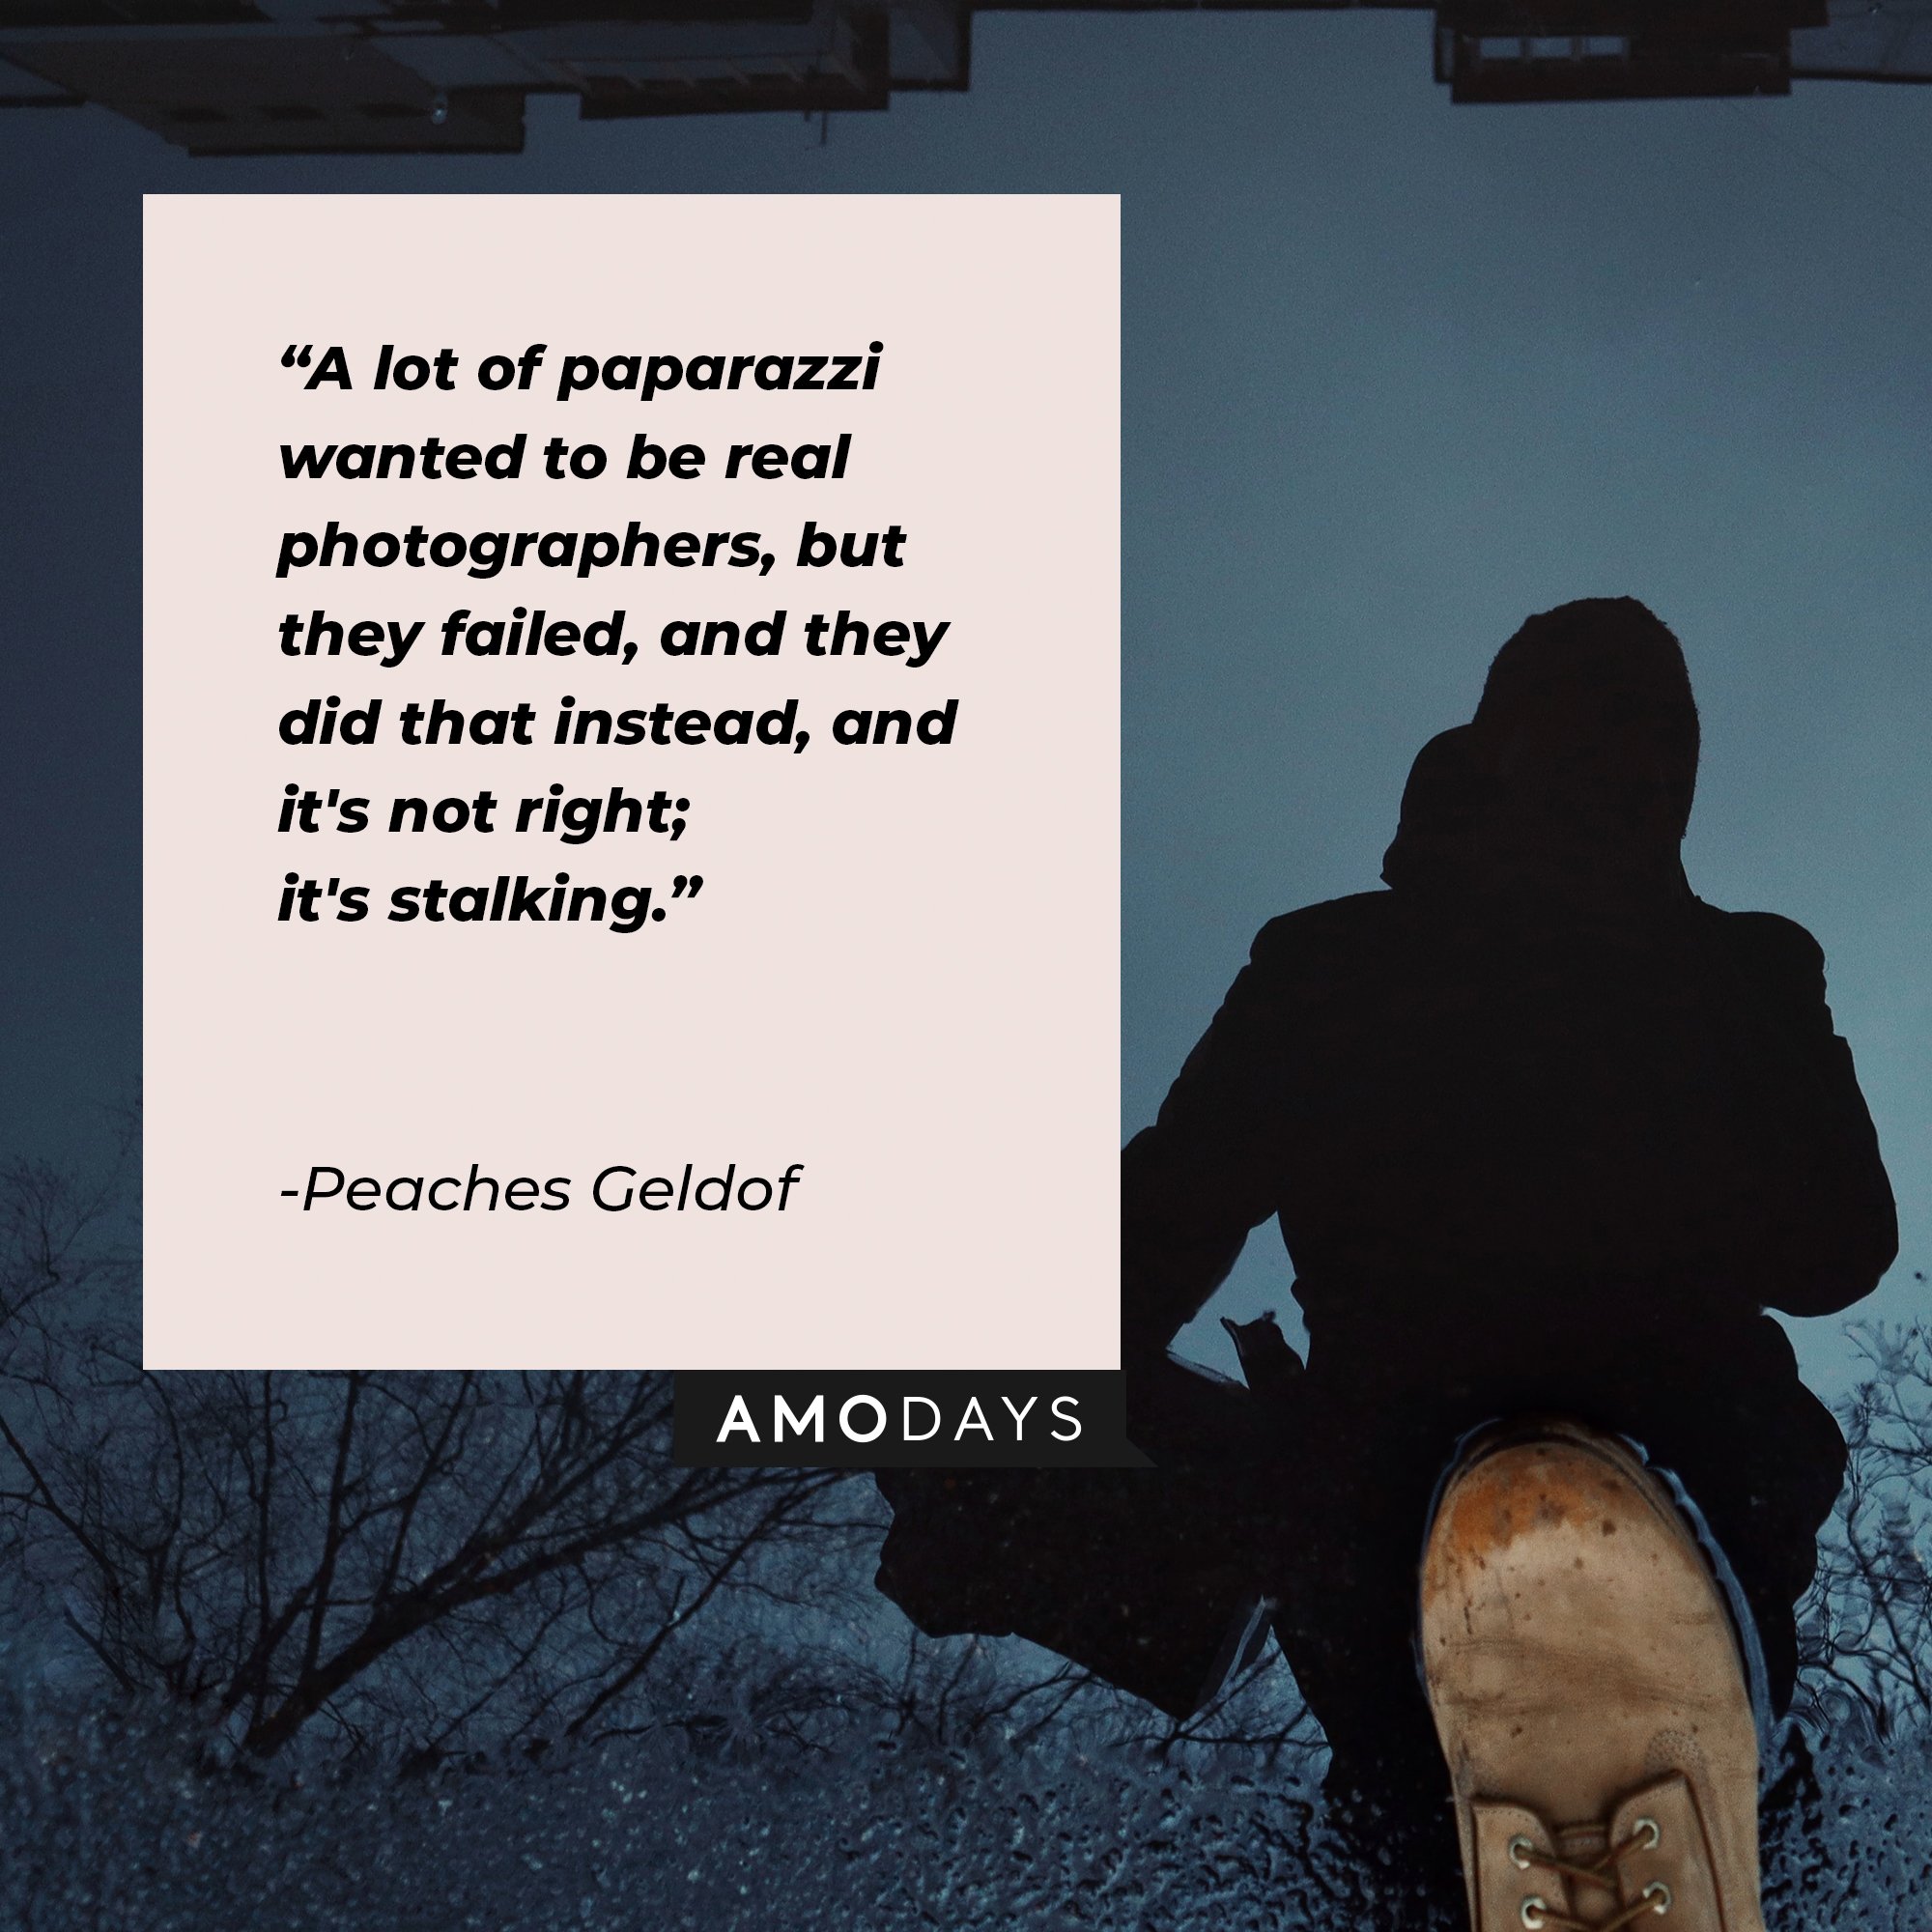 Peaches Geldof’s quote: “A lot of paparazzi wanted to be real photographers, but they failed, and they did that instead, and it's not right; it's stalking.” | Image: AmoDays